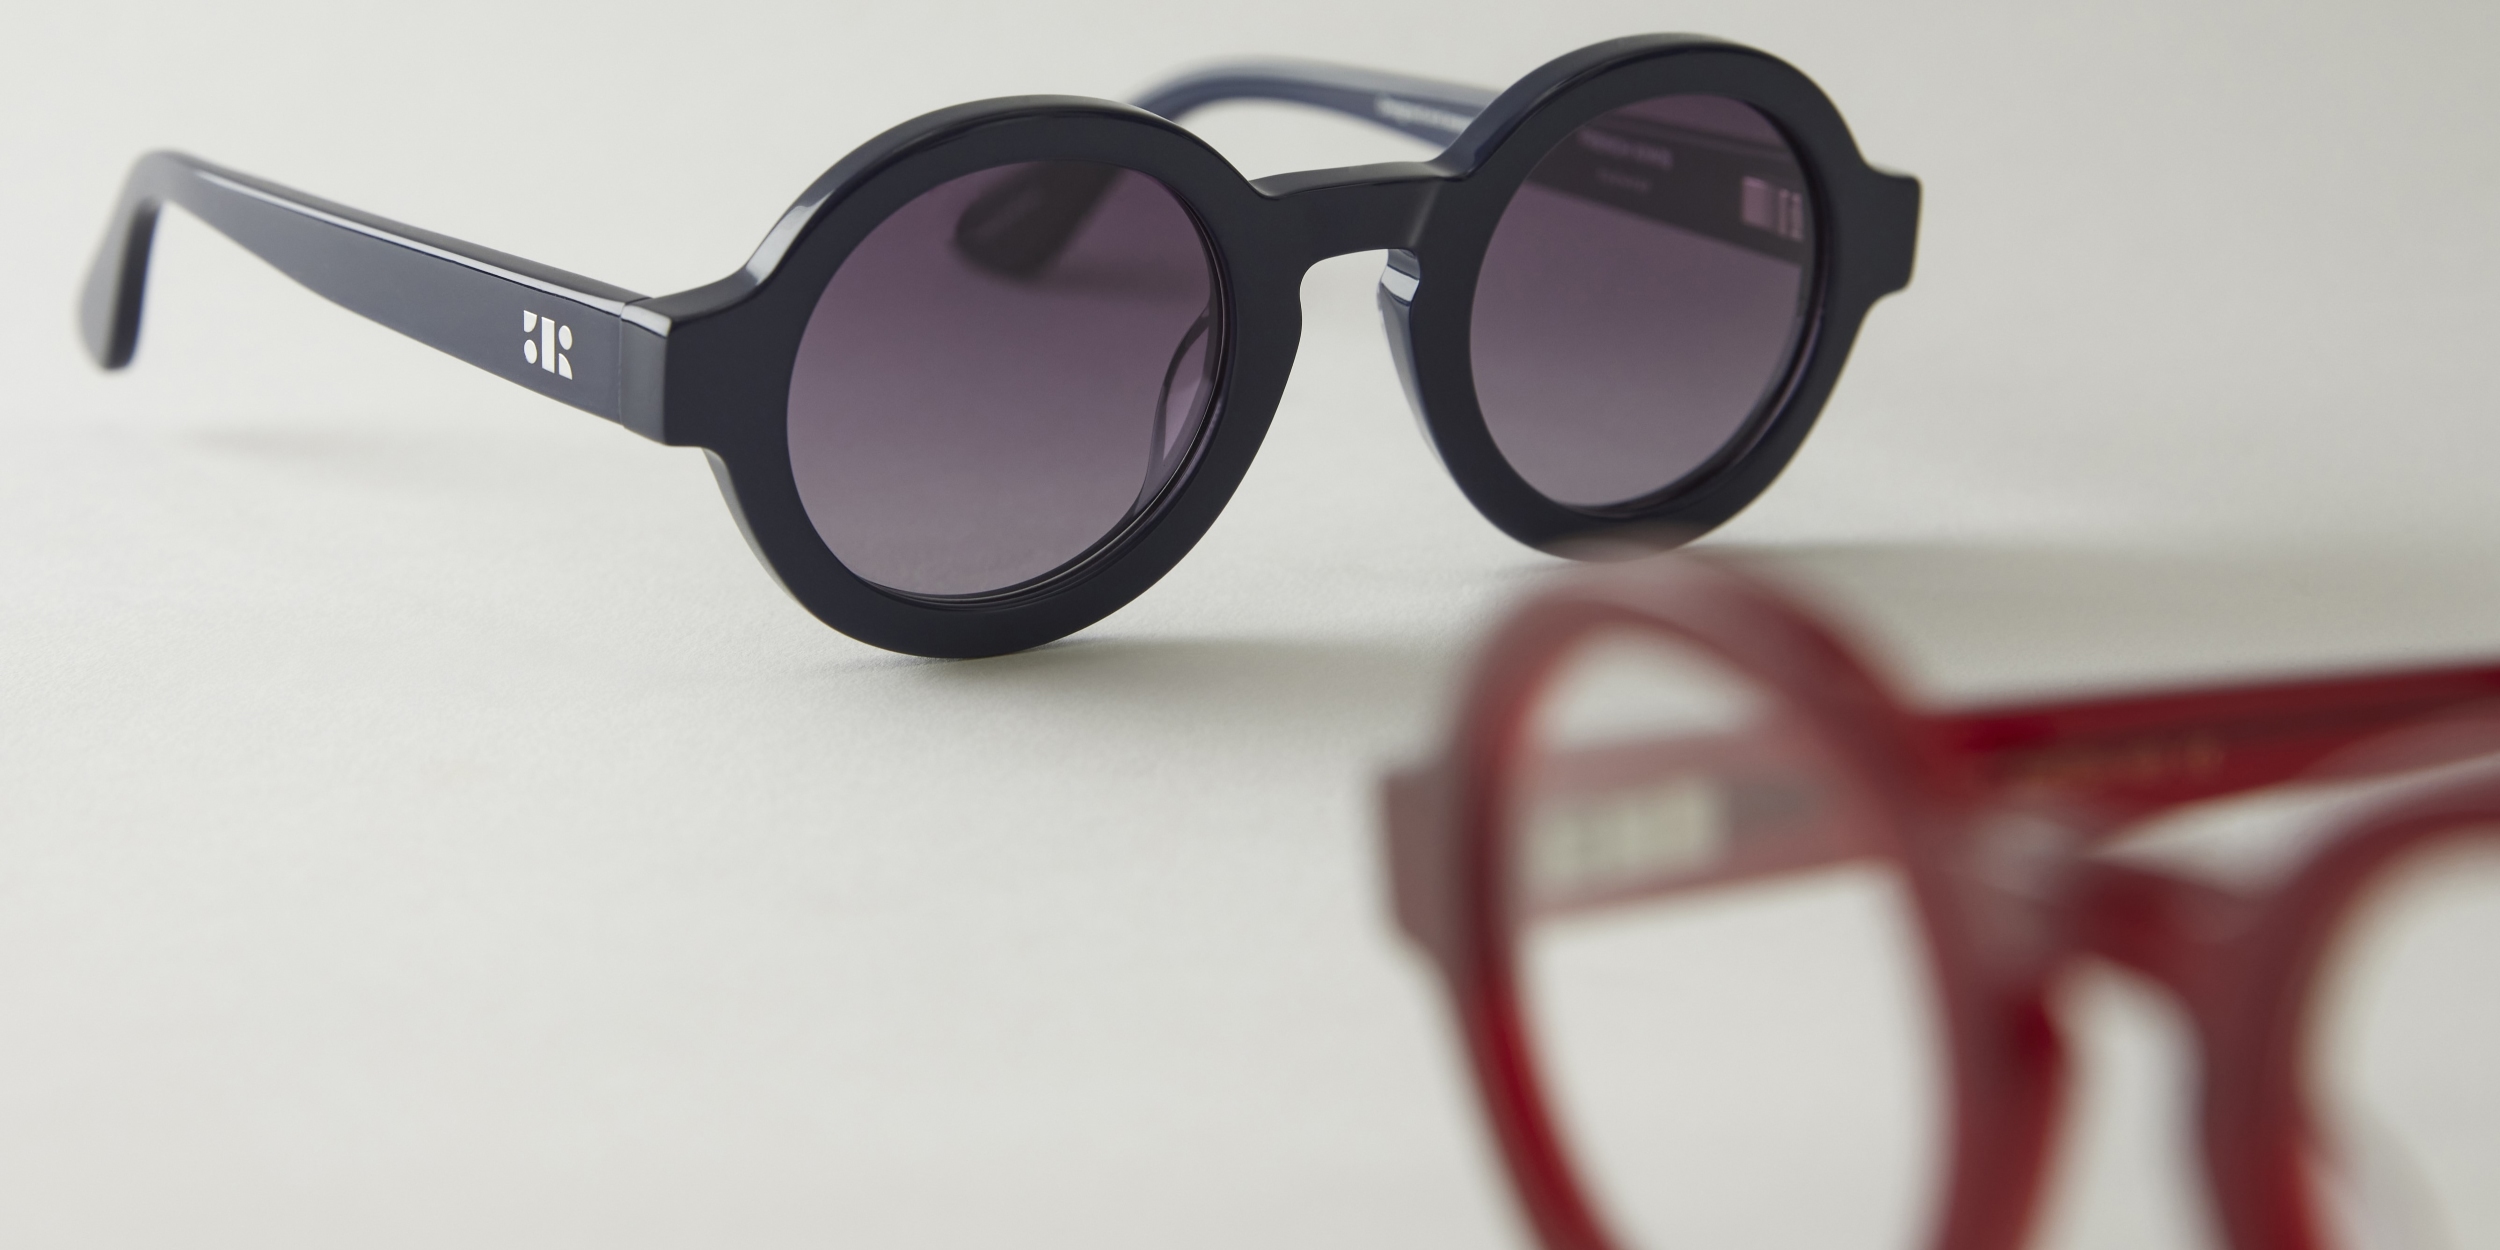 Photo Details of Lola Sun Cherry Sun Glasses in a room